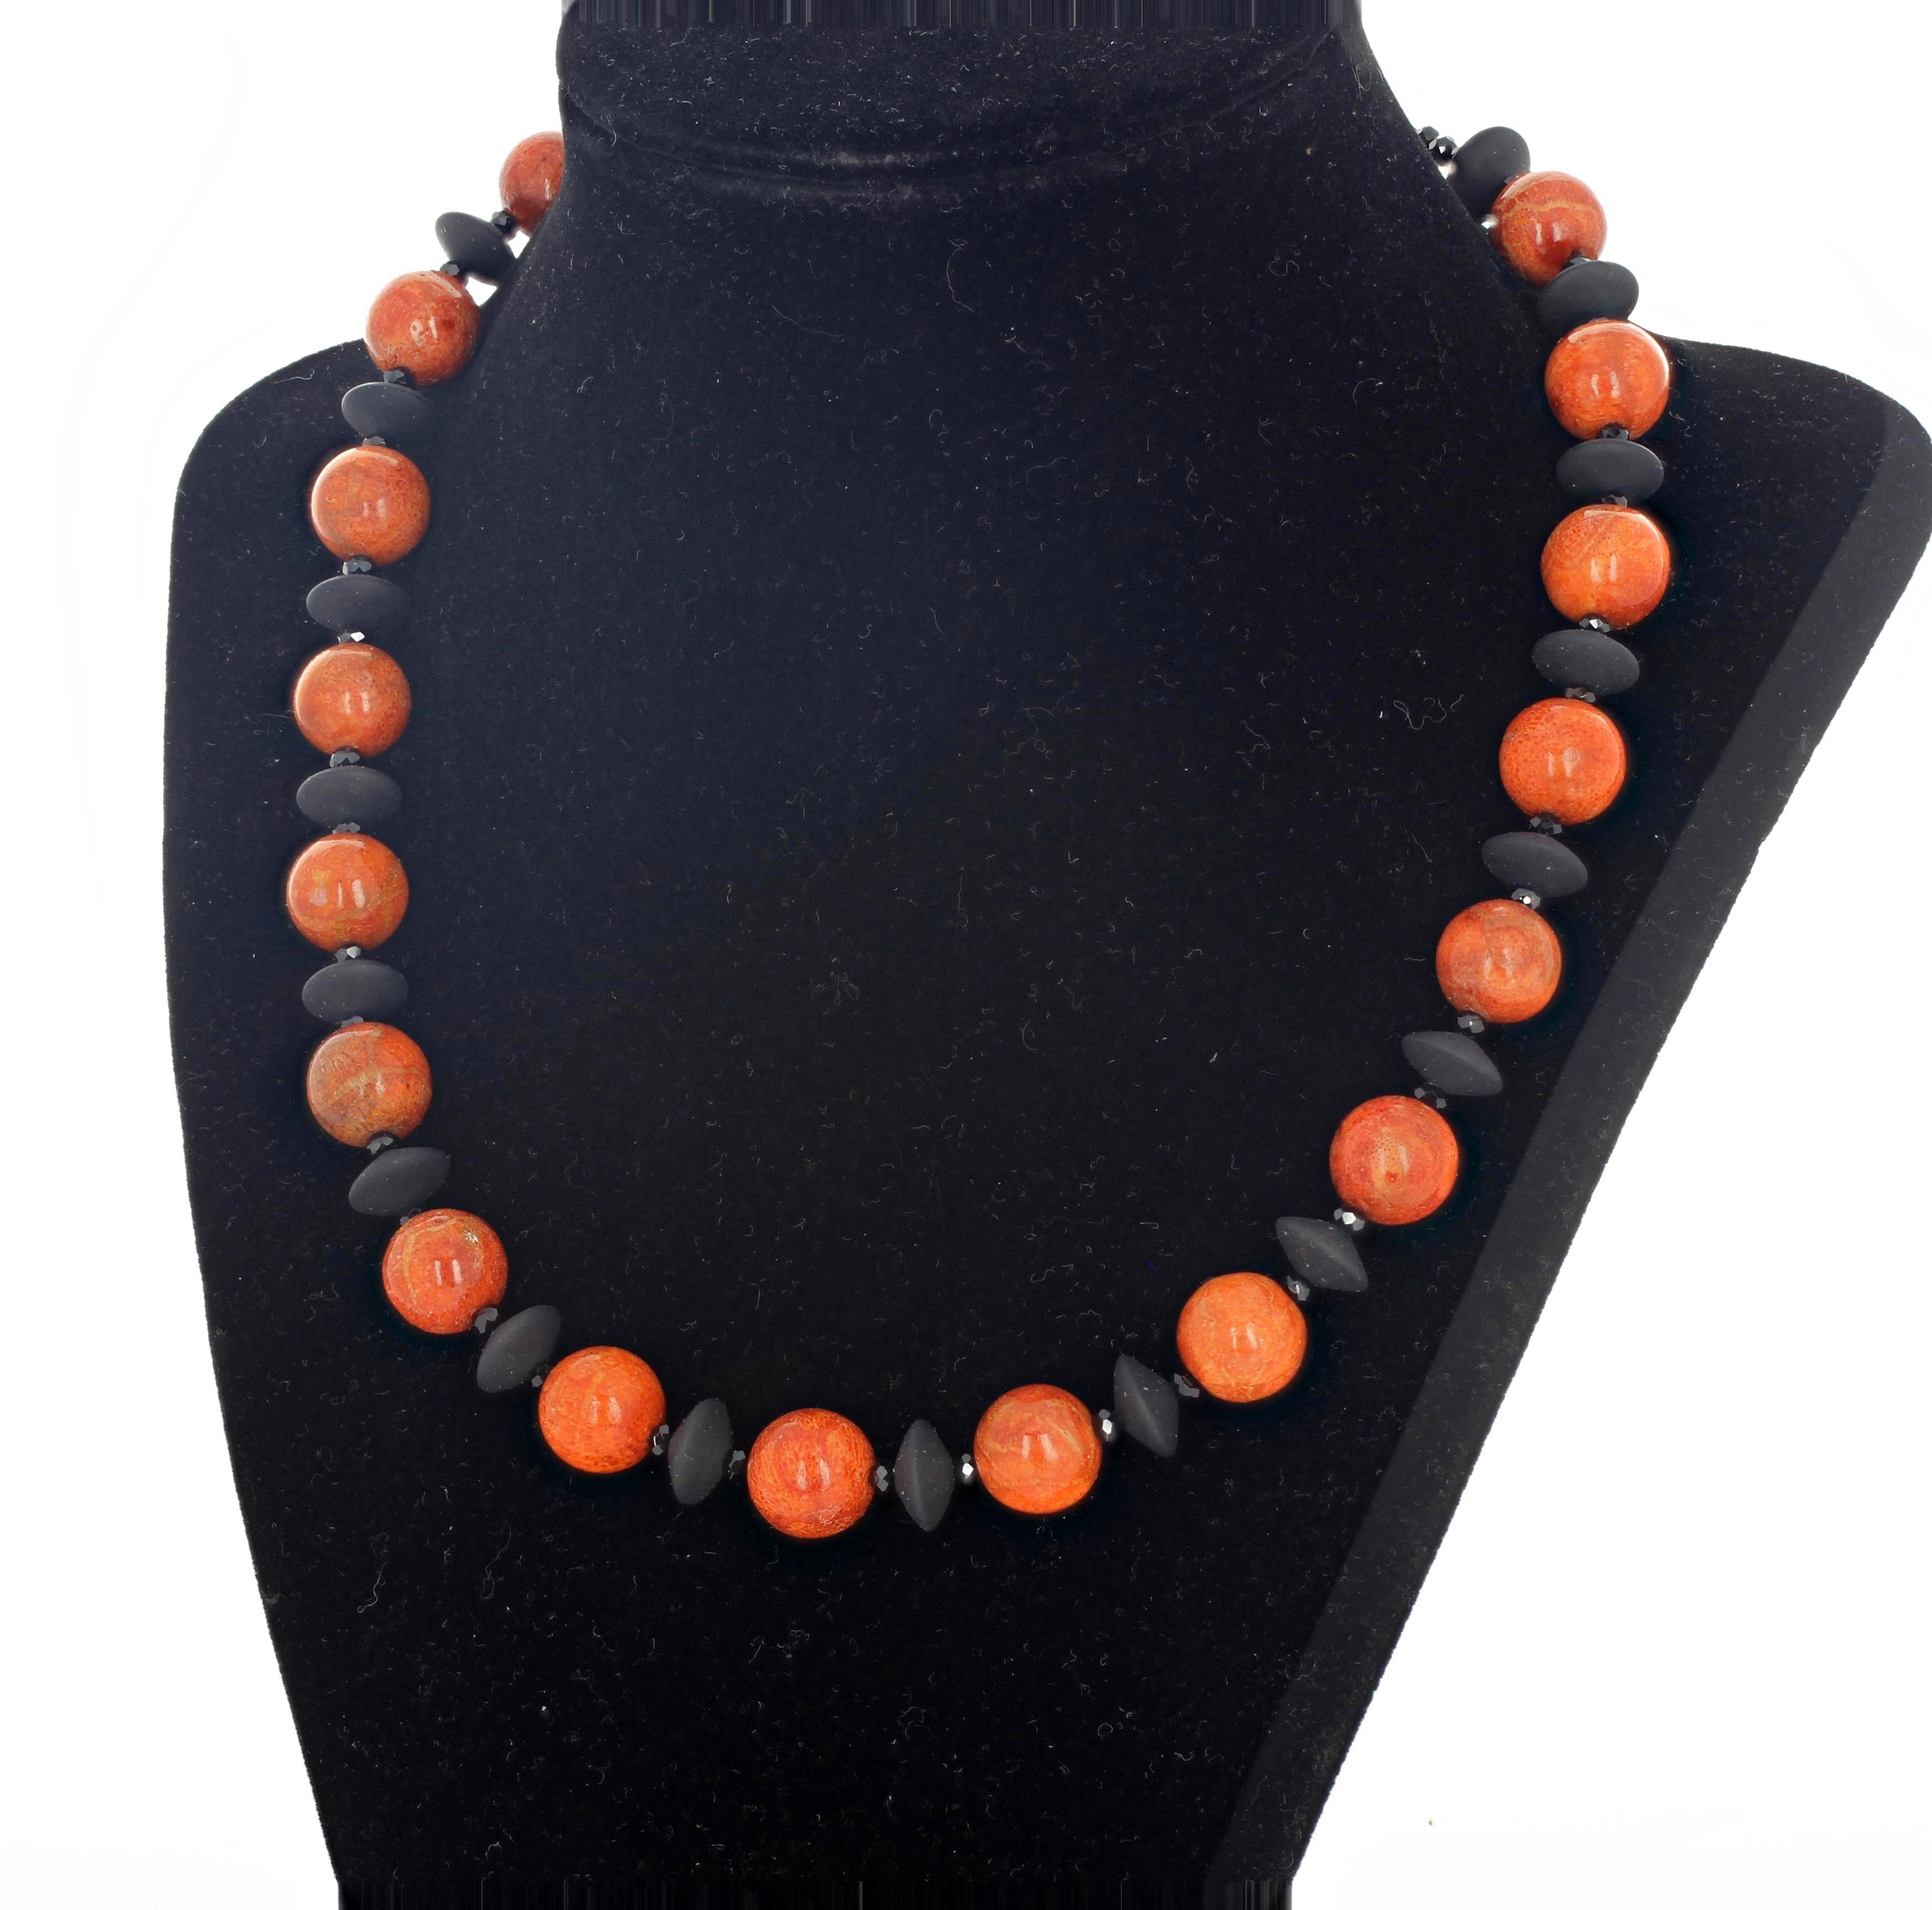 Rare round reddish orangy natural Bamboo Coral (11 mm) set with designer disks of beautiful polished flat black Onyx and brilliant gem cut sparkling little black Spinels in a necklace 18 inches long with a gold tone clasp. 